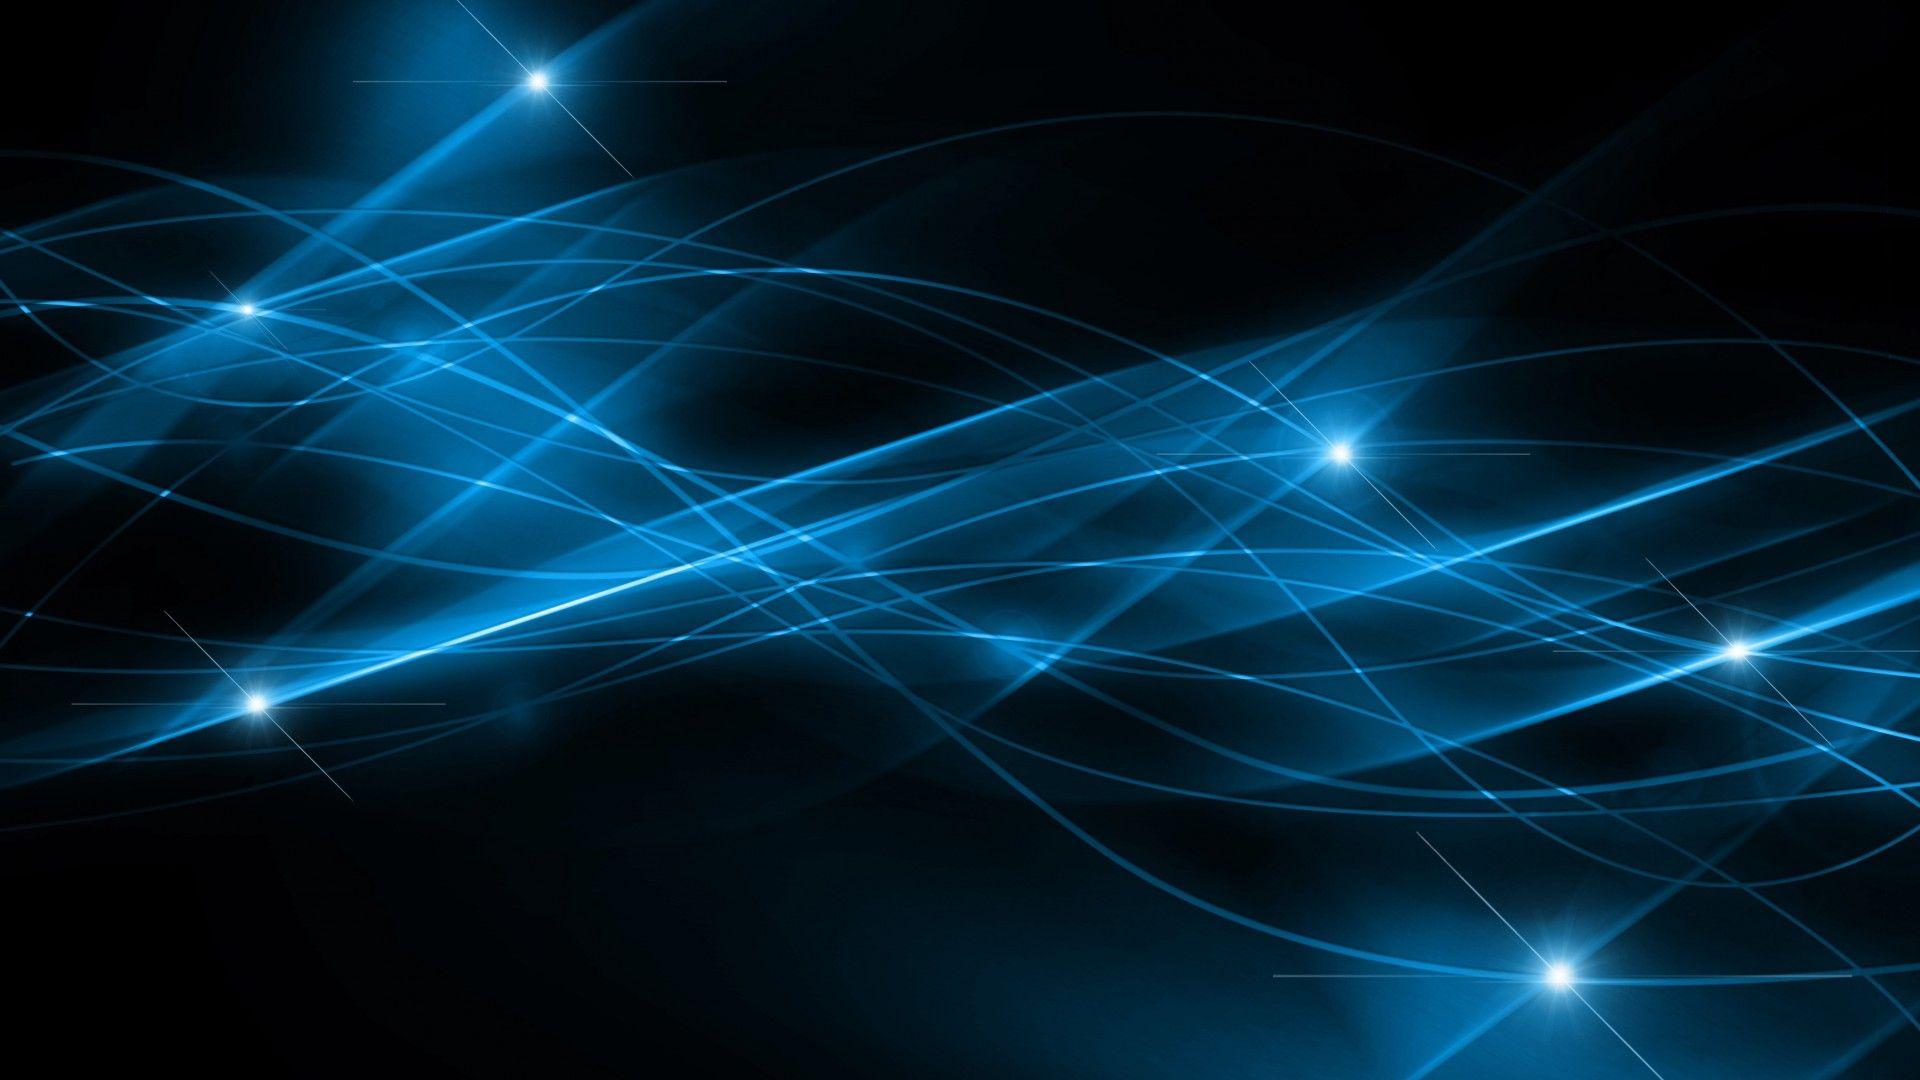 Black and blue abstract wallpaper background. file